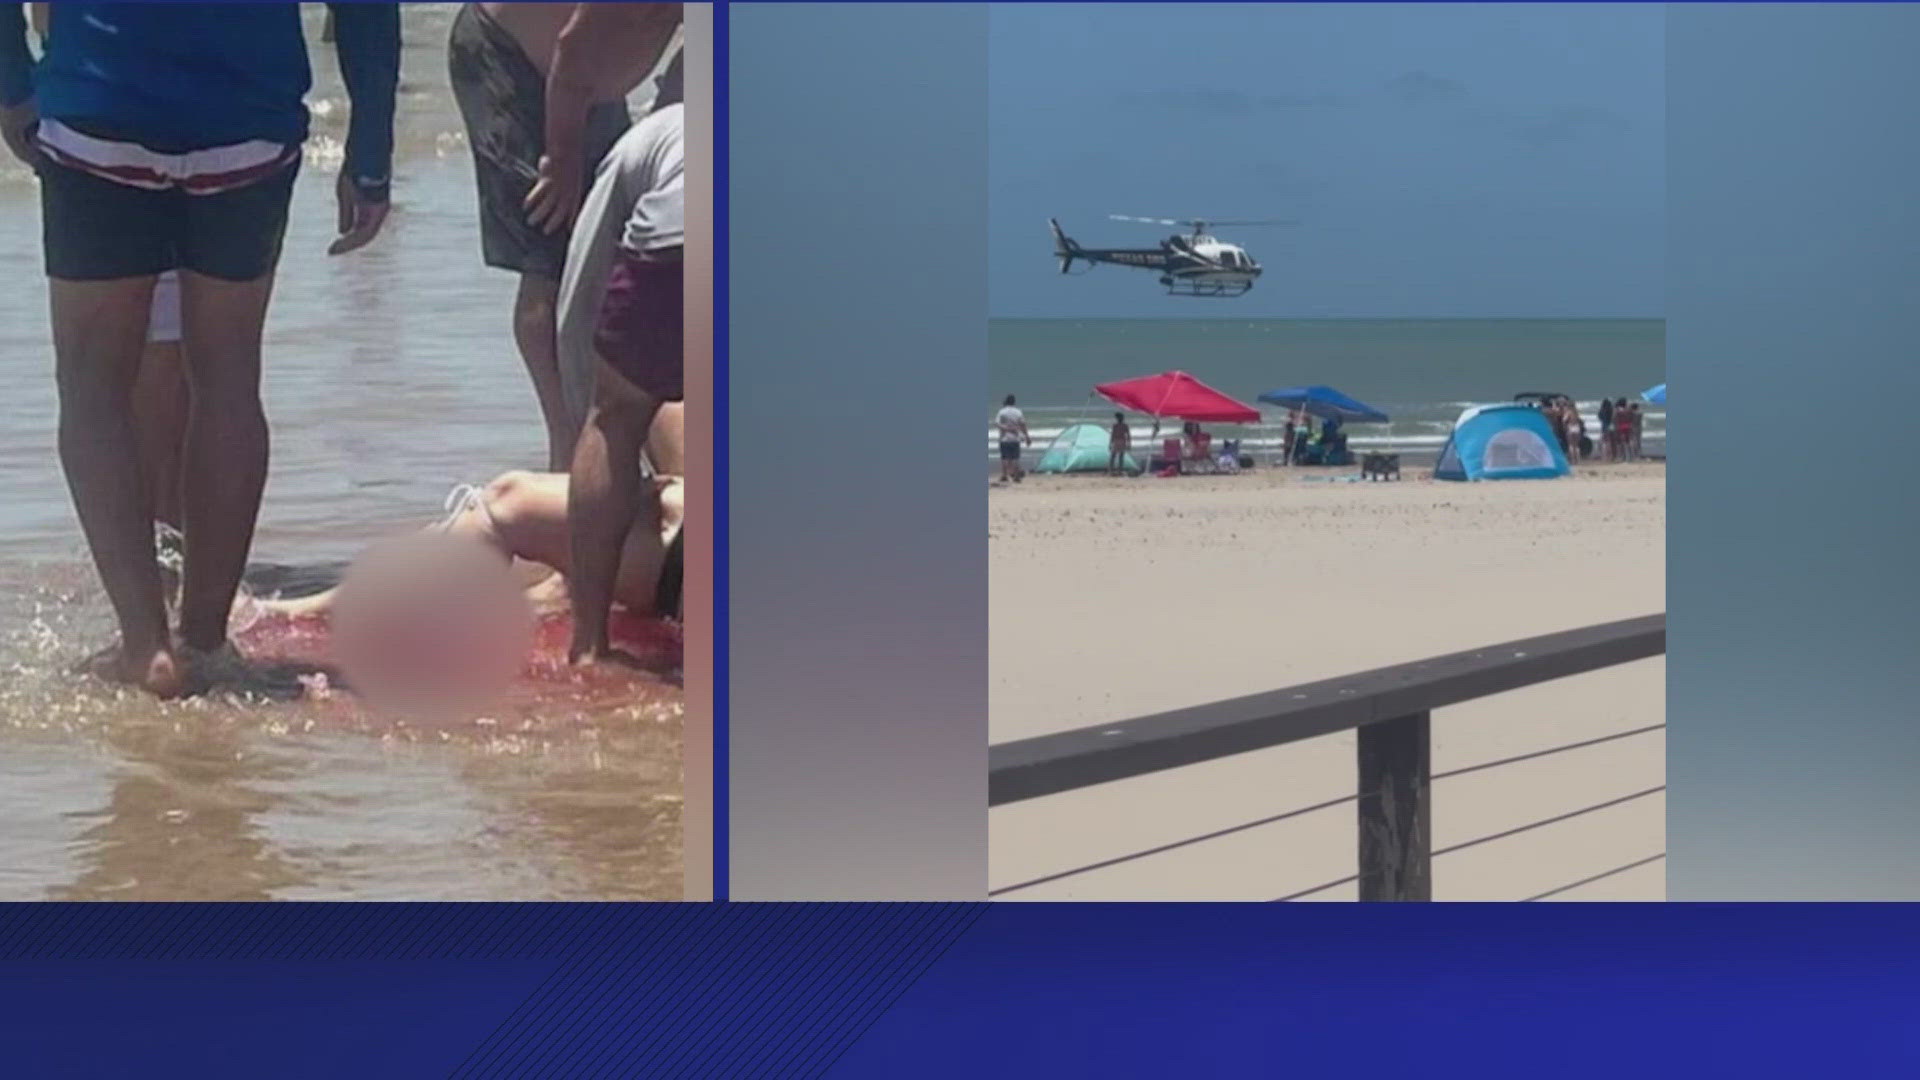 Authorities believe the same shark attacked four people across a roughly two-hour span today along South Padre Island.